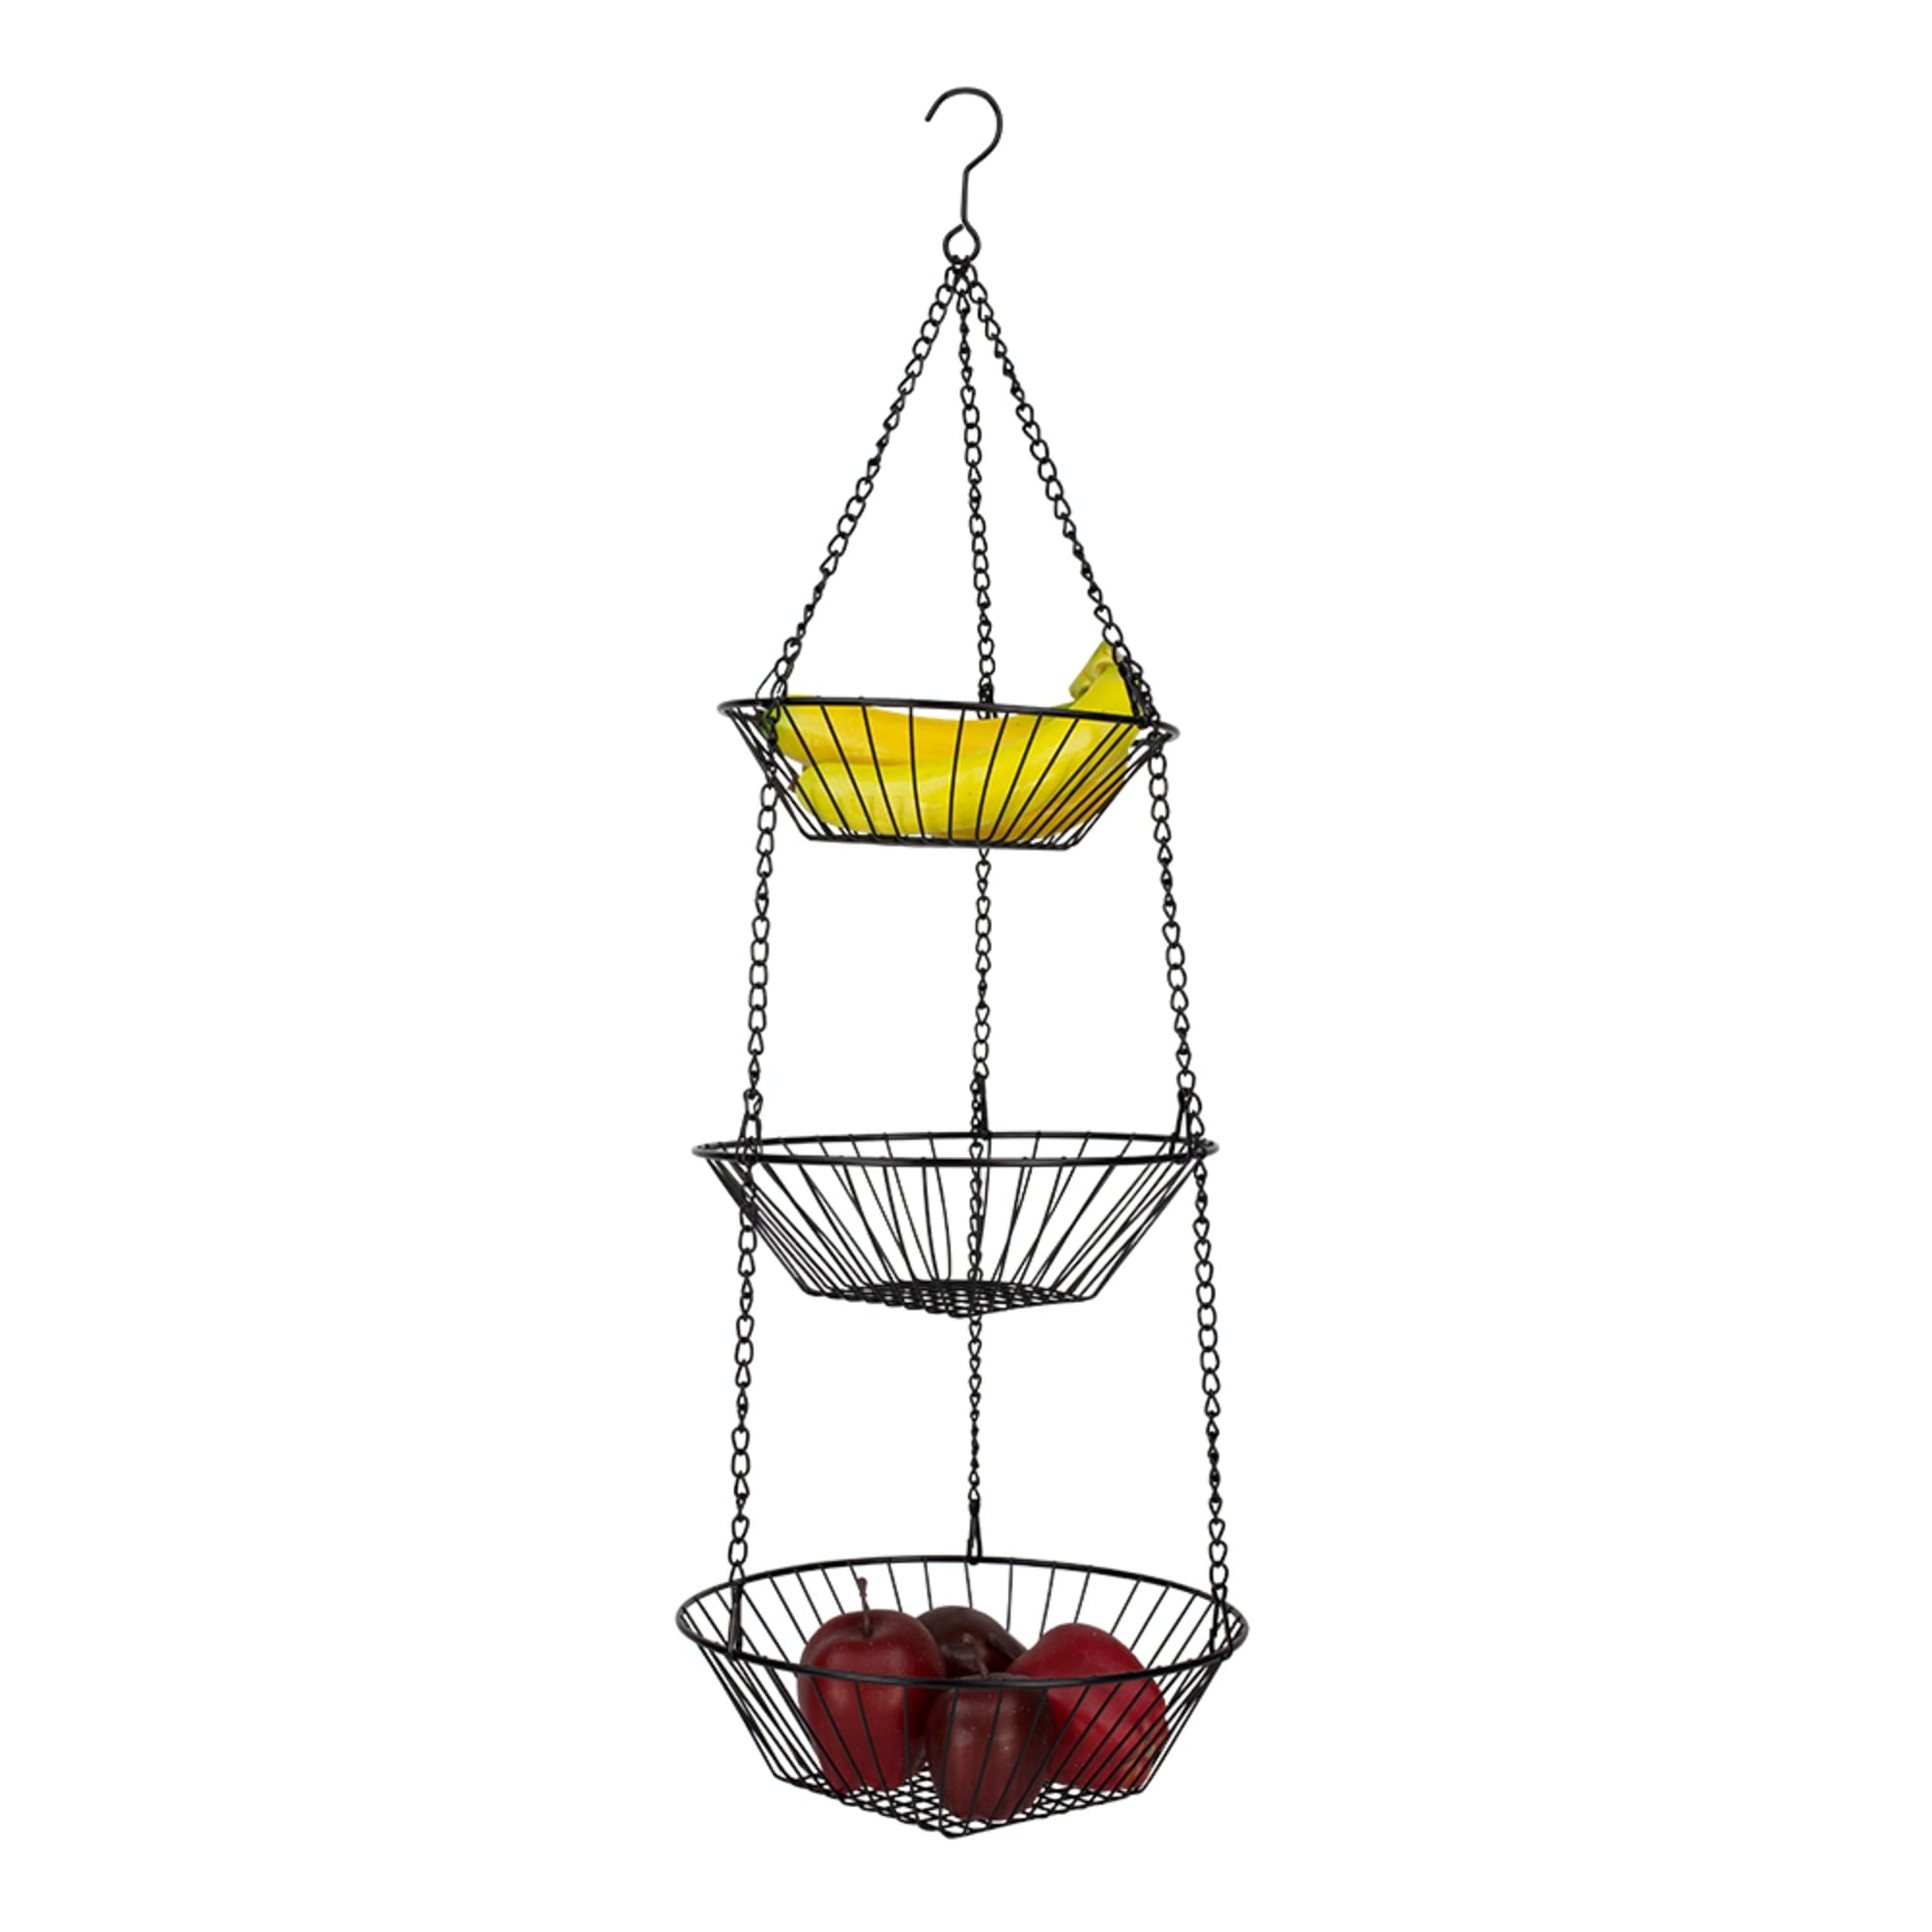 Home Basics  3 Tier Wire Hanging Round Fruit Basket, Black $5 EACH, CASE PACK OF 12